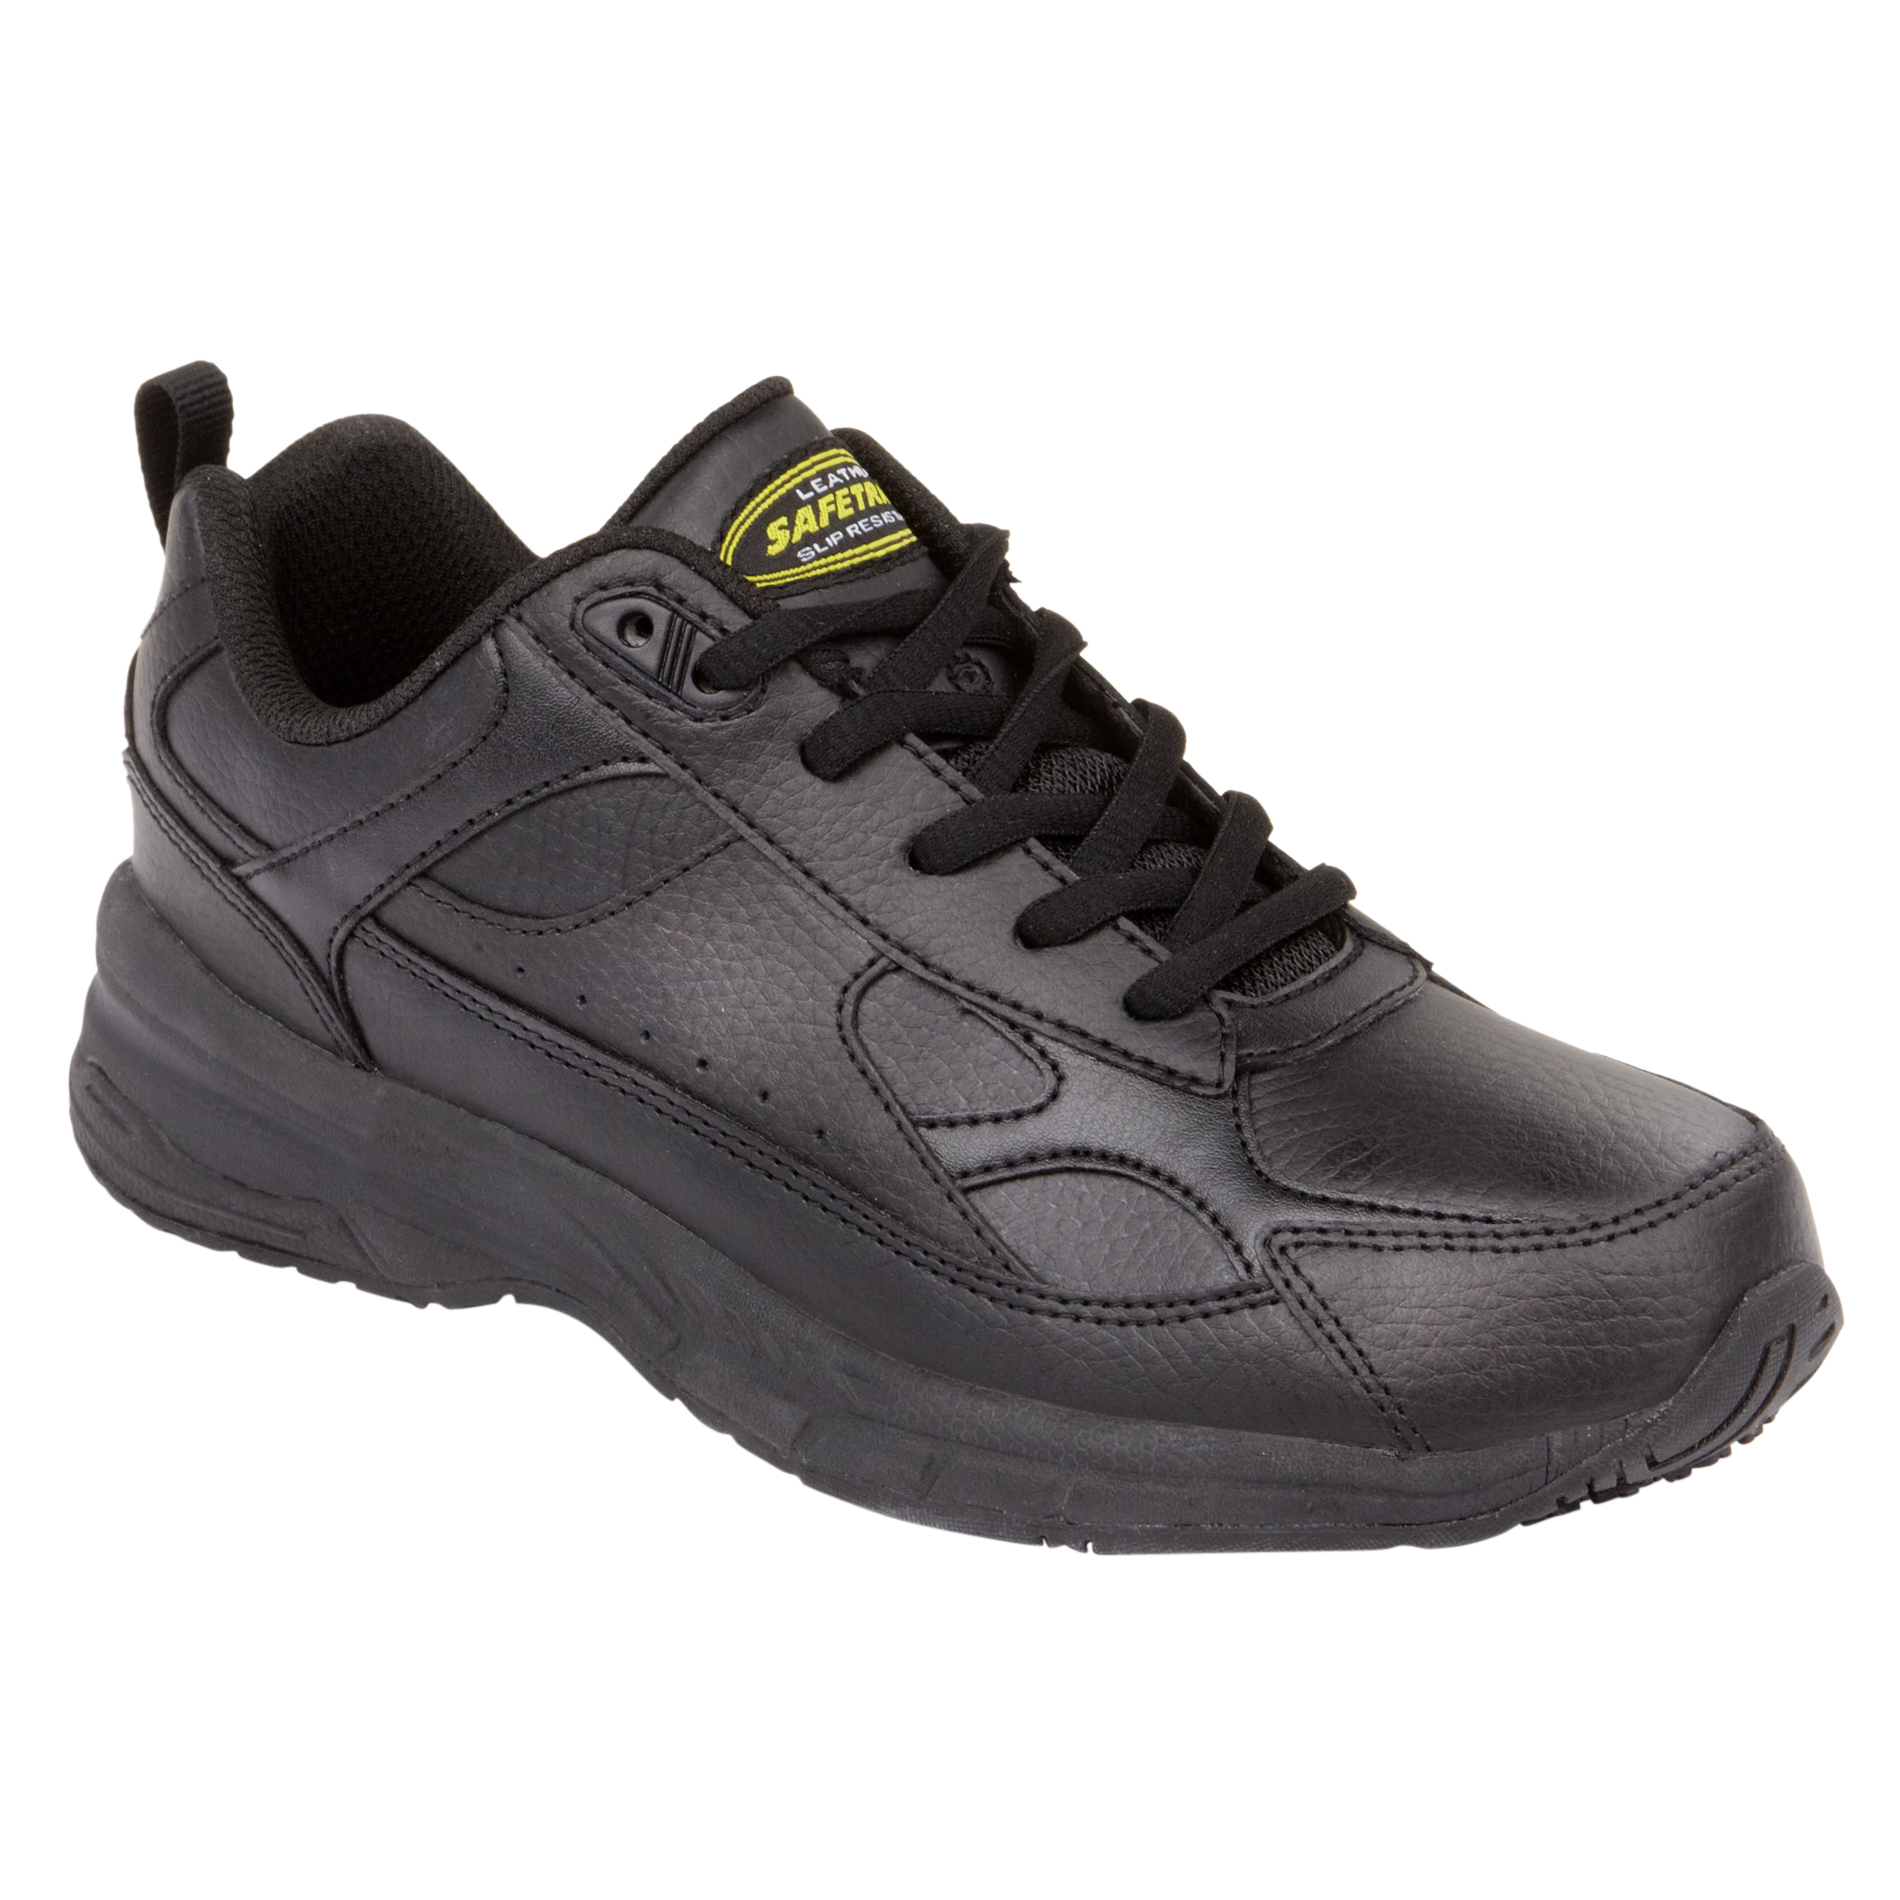 wide non slip work shoes